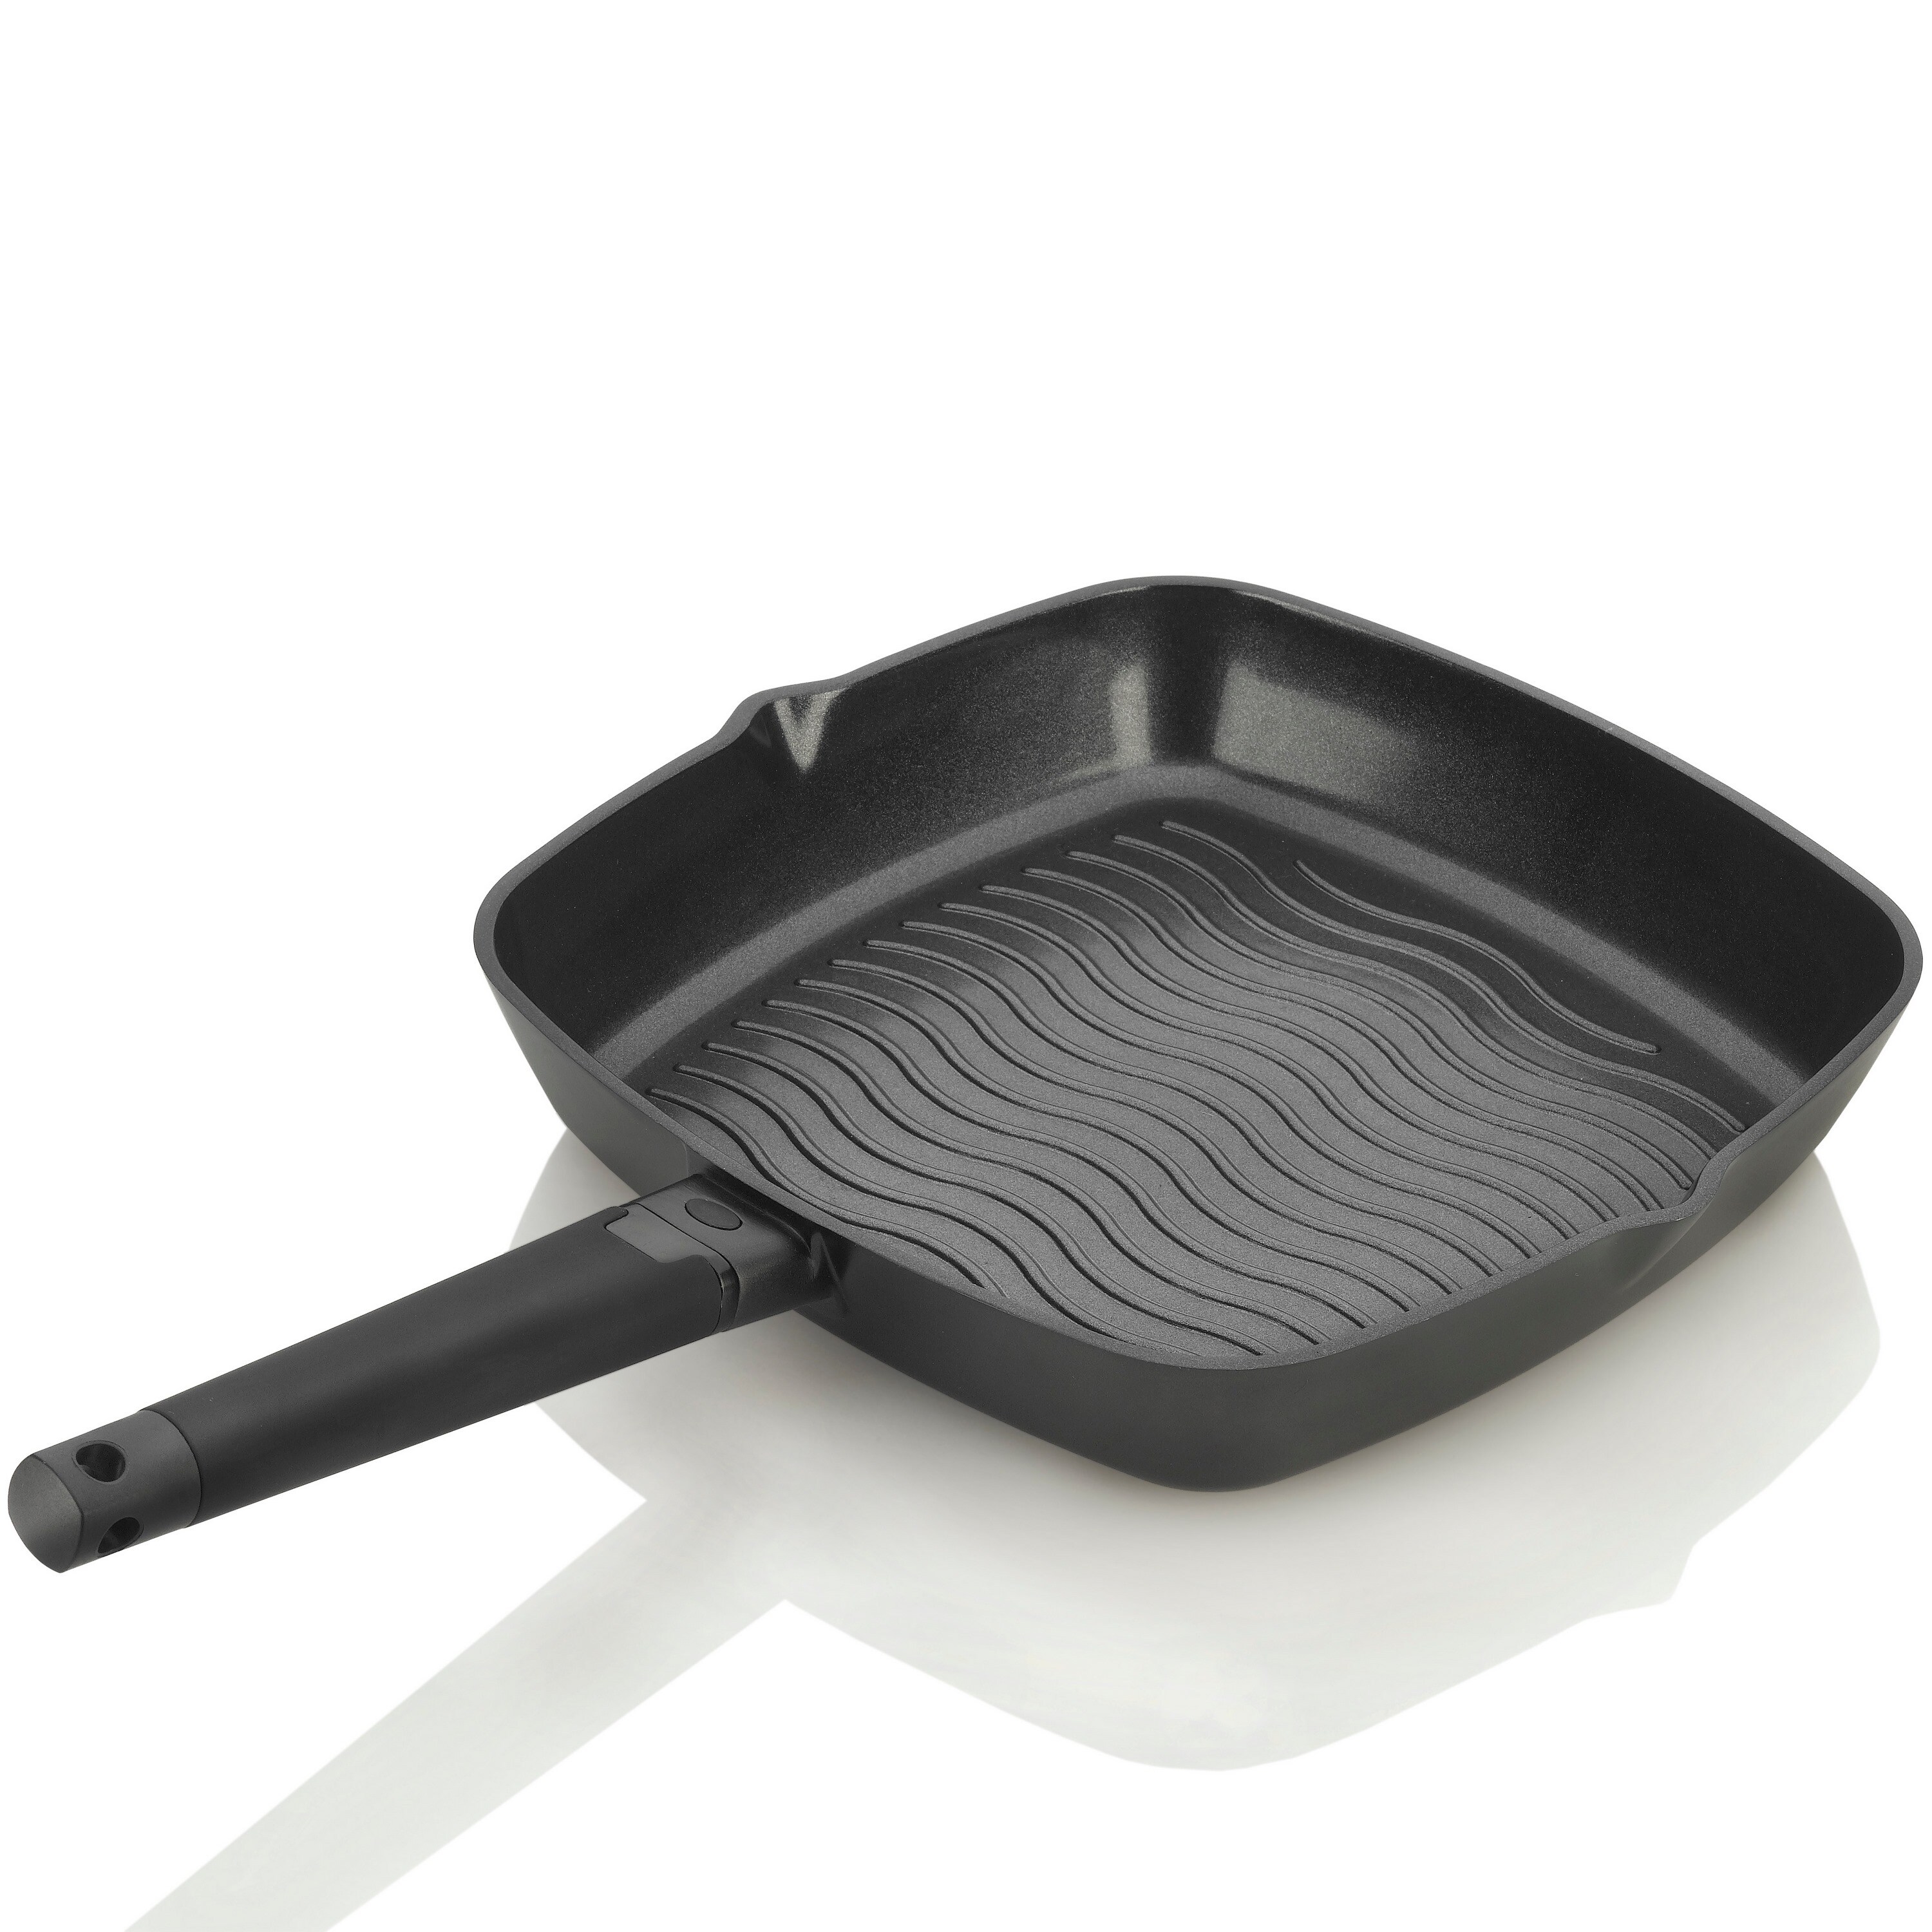 NEW! As Seen On TV 12" Ceramic and Titanium Nonstick XL Double Grill 